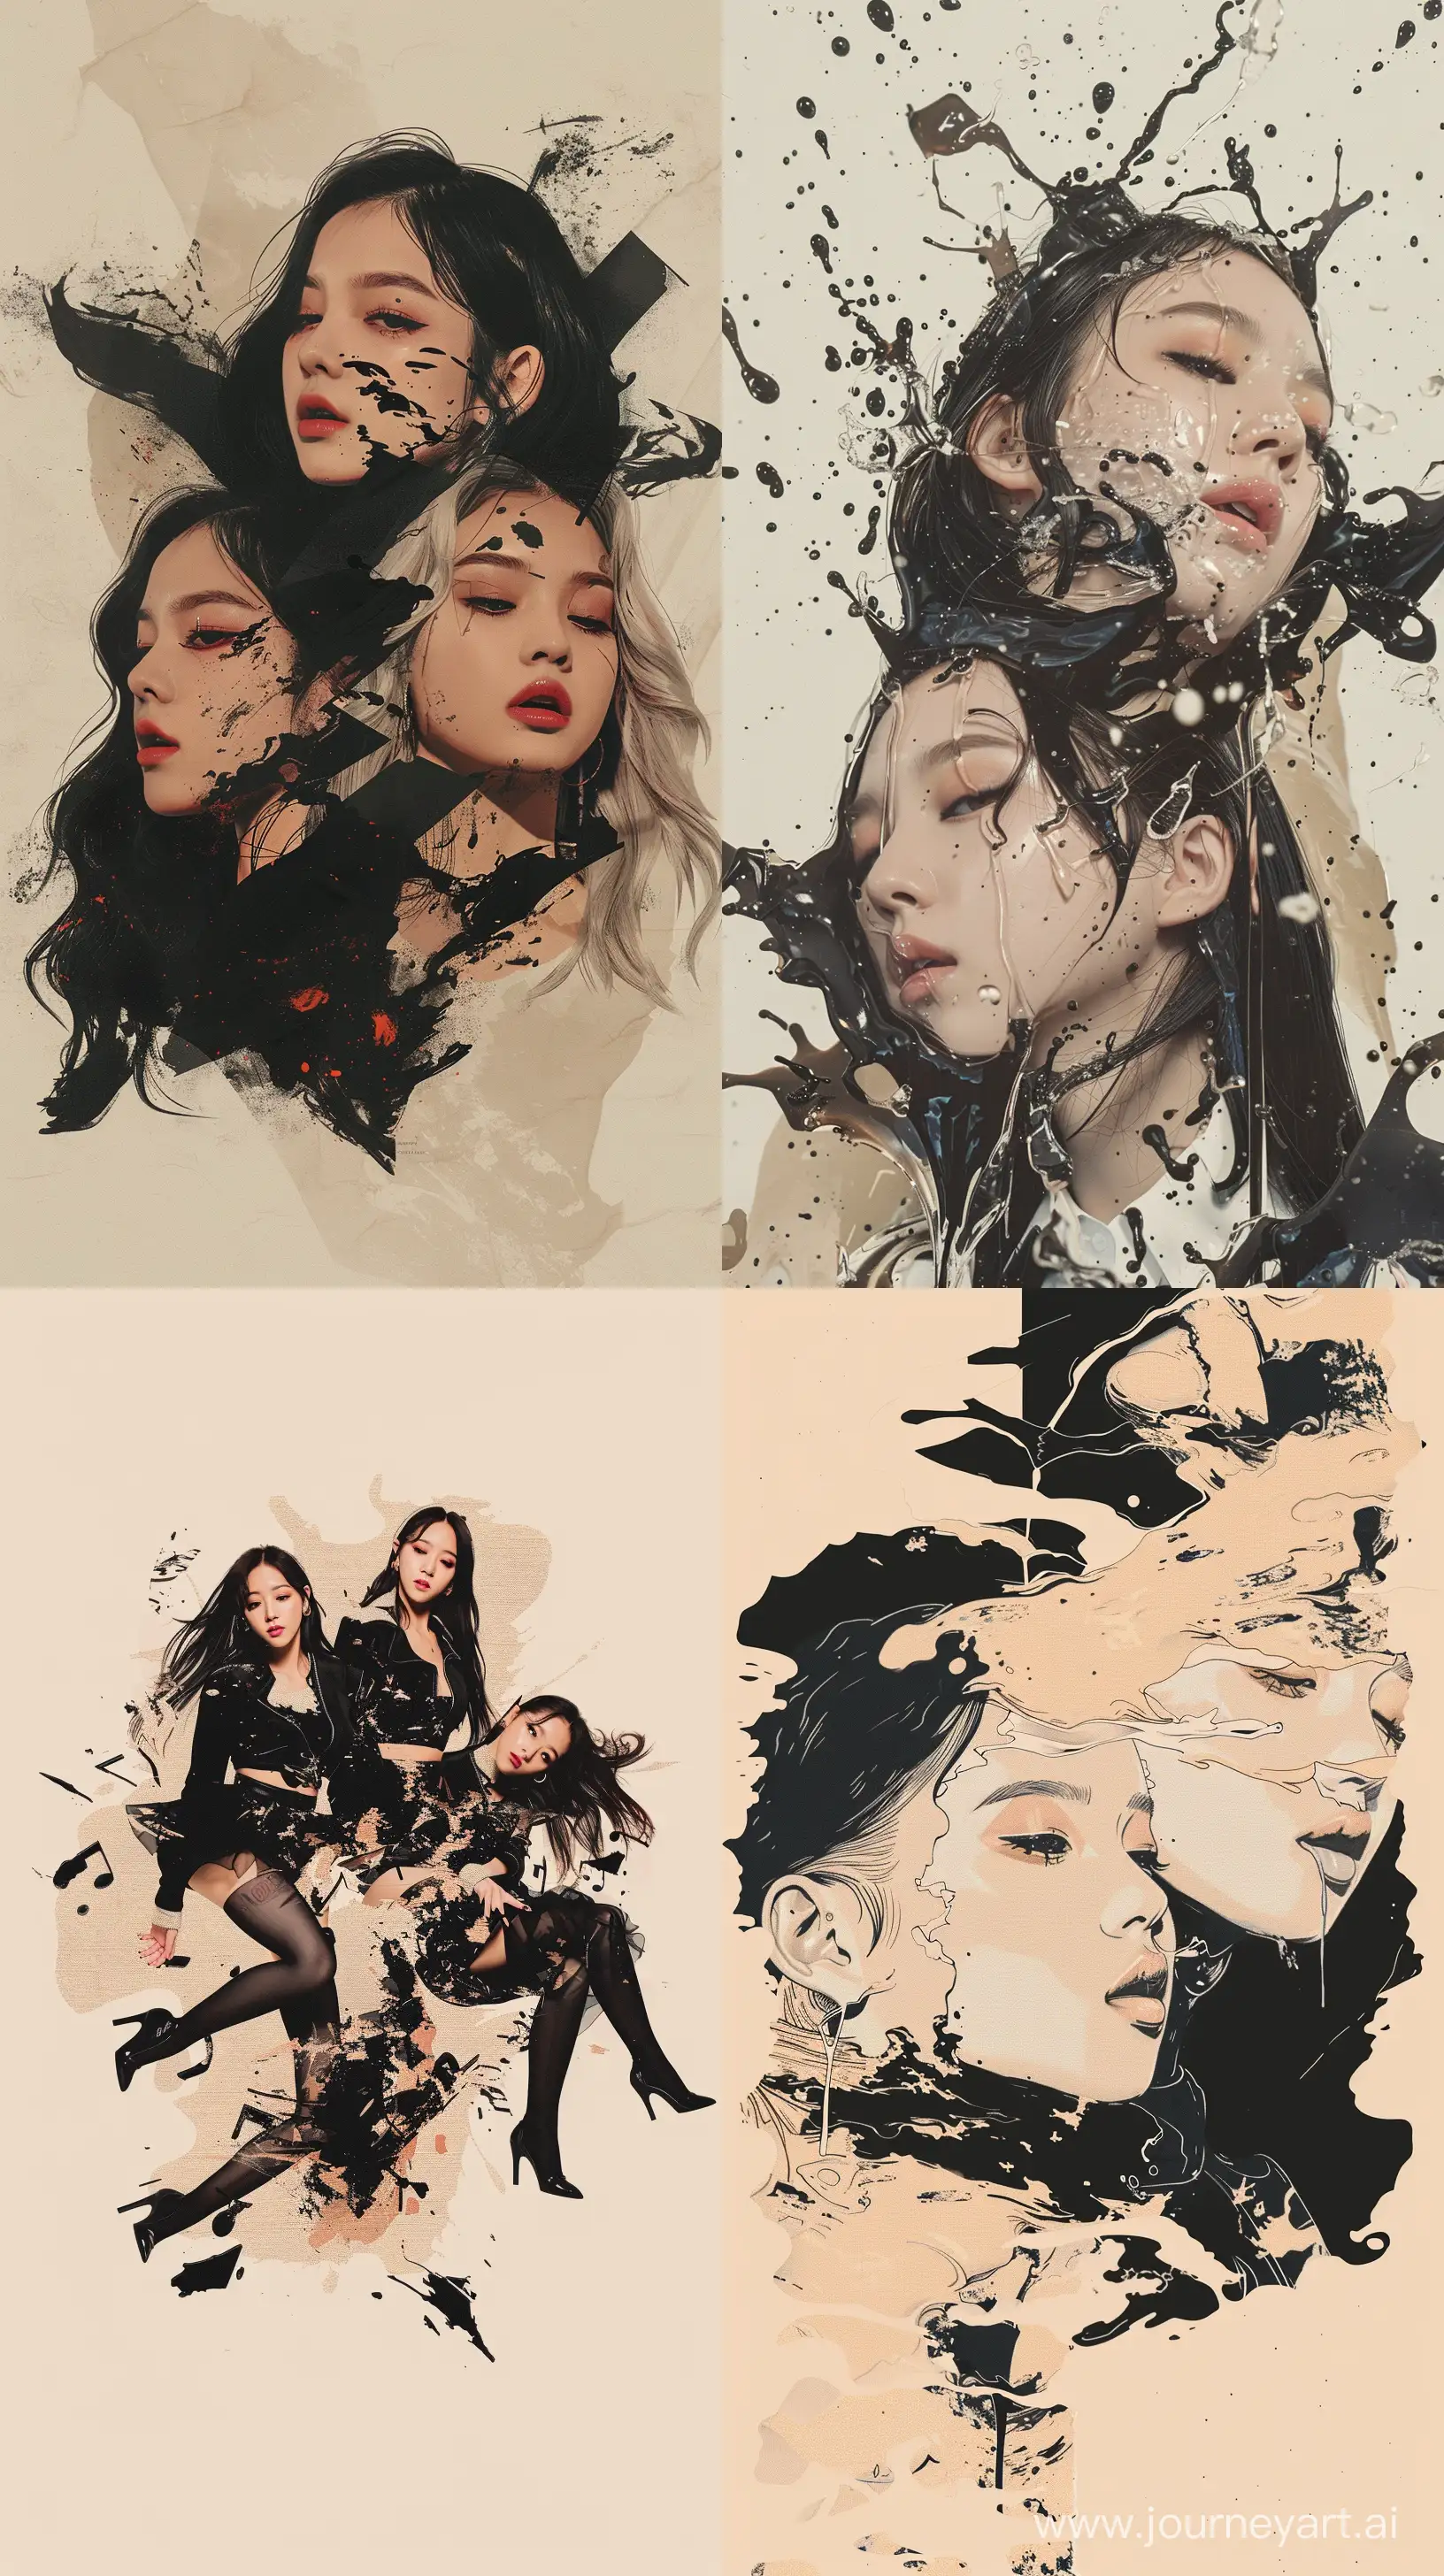 Distorted-and-Grotesque-Album-Cover-Inspired-by-Jennie-Blackpinks-Style